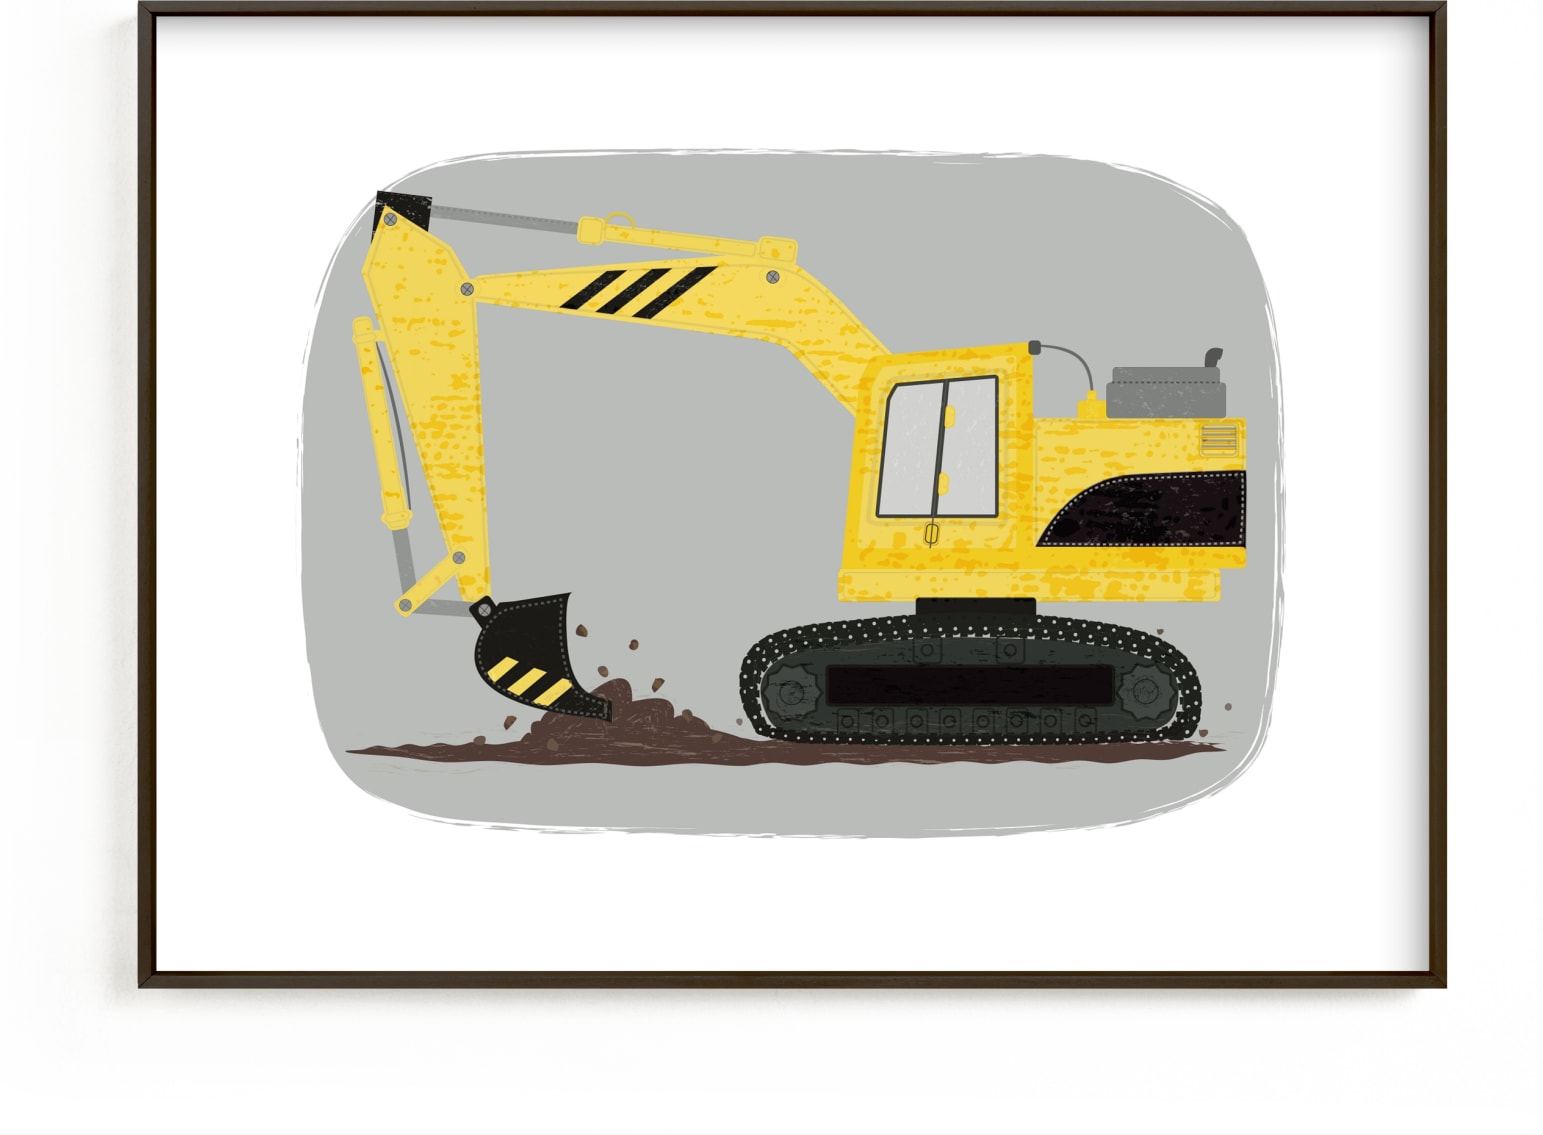 This is a yellow, grey, black kids wall art by Rebecca Marchese called The Construction Excavator.